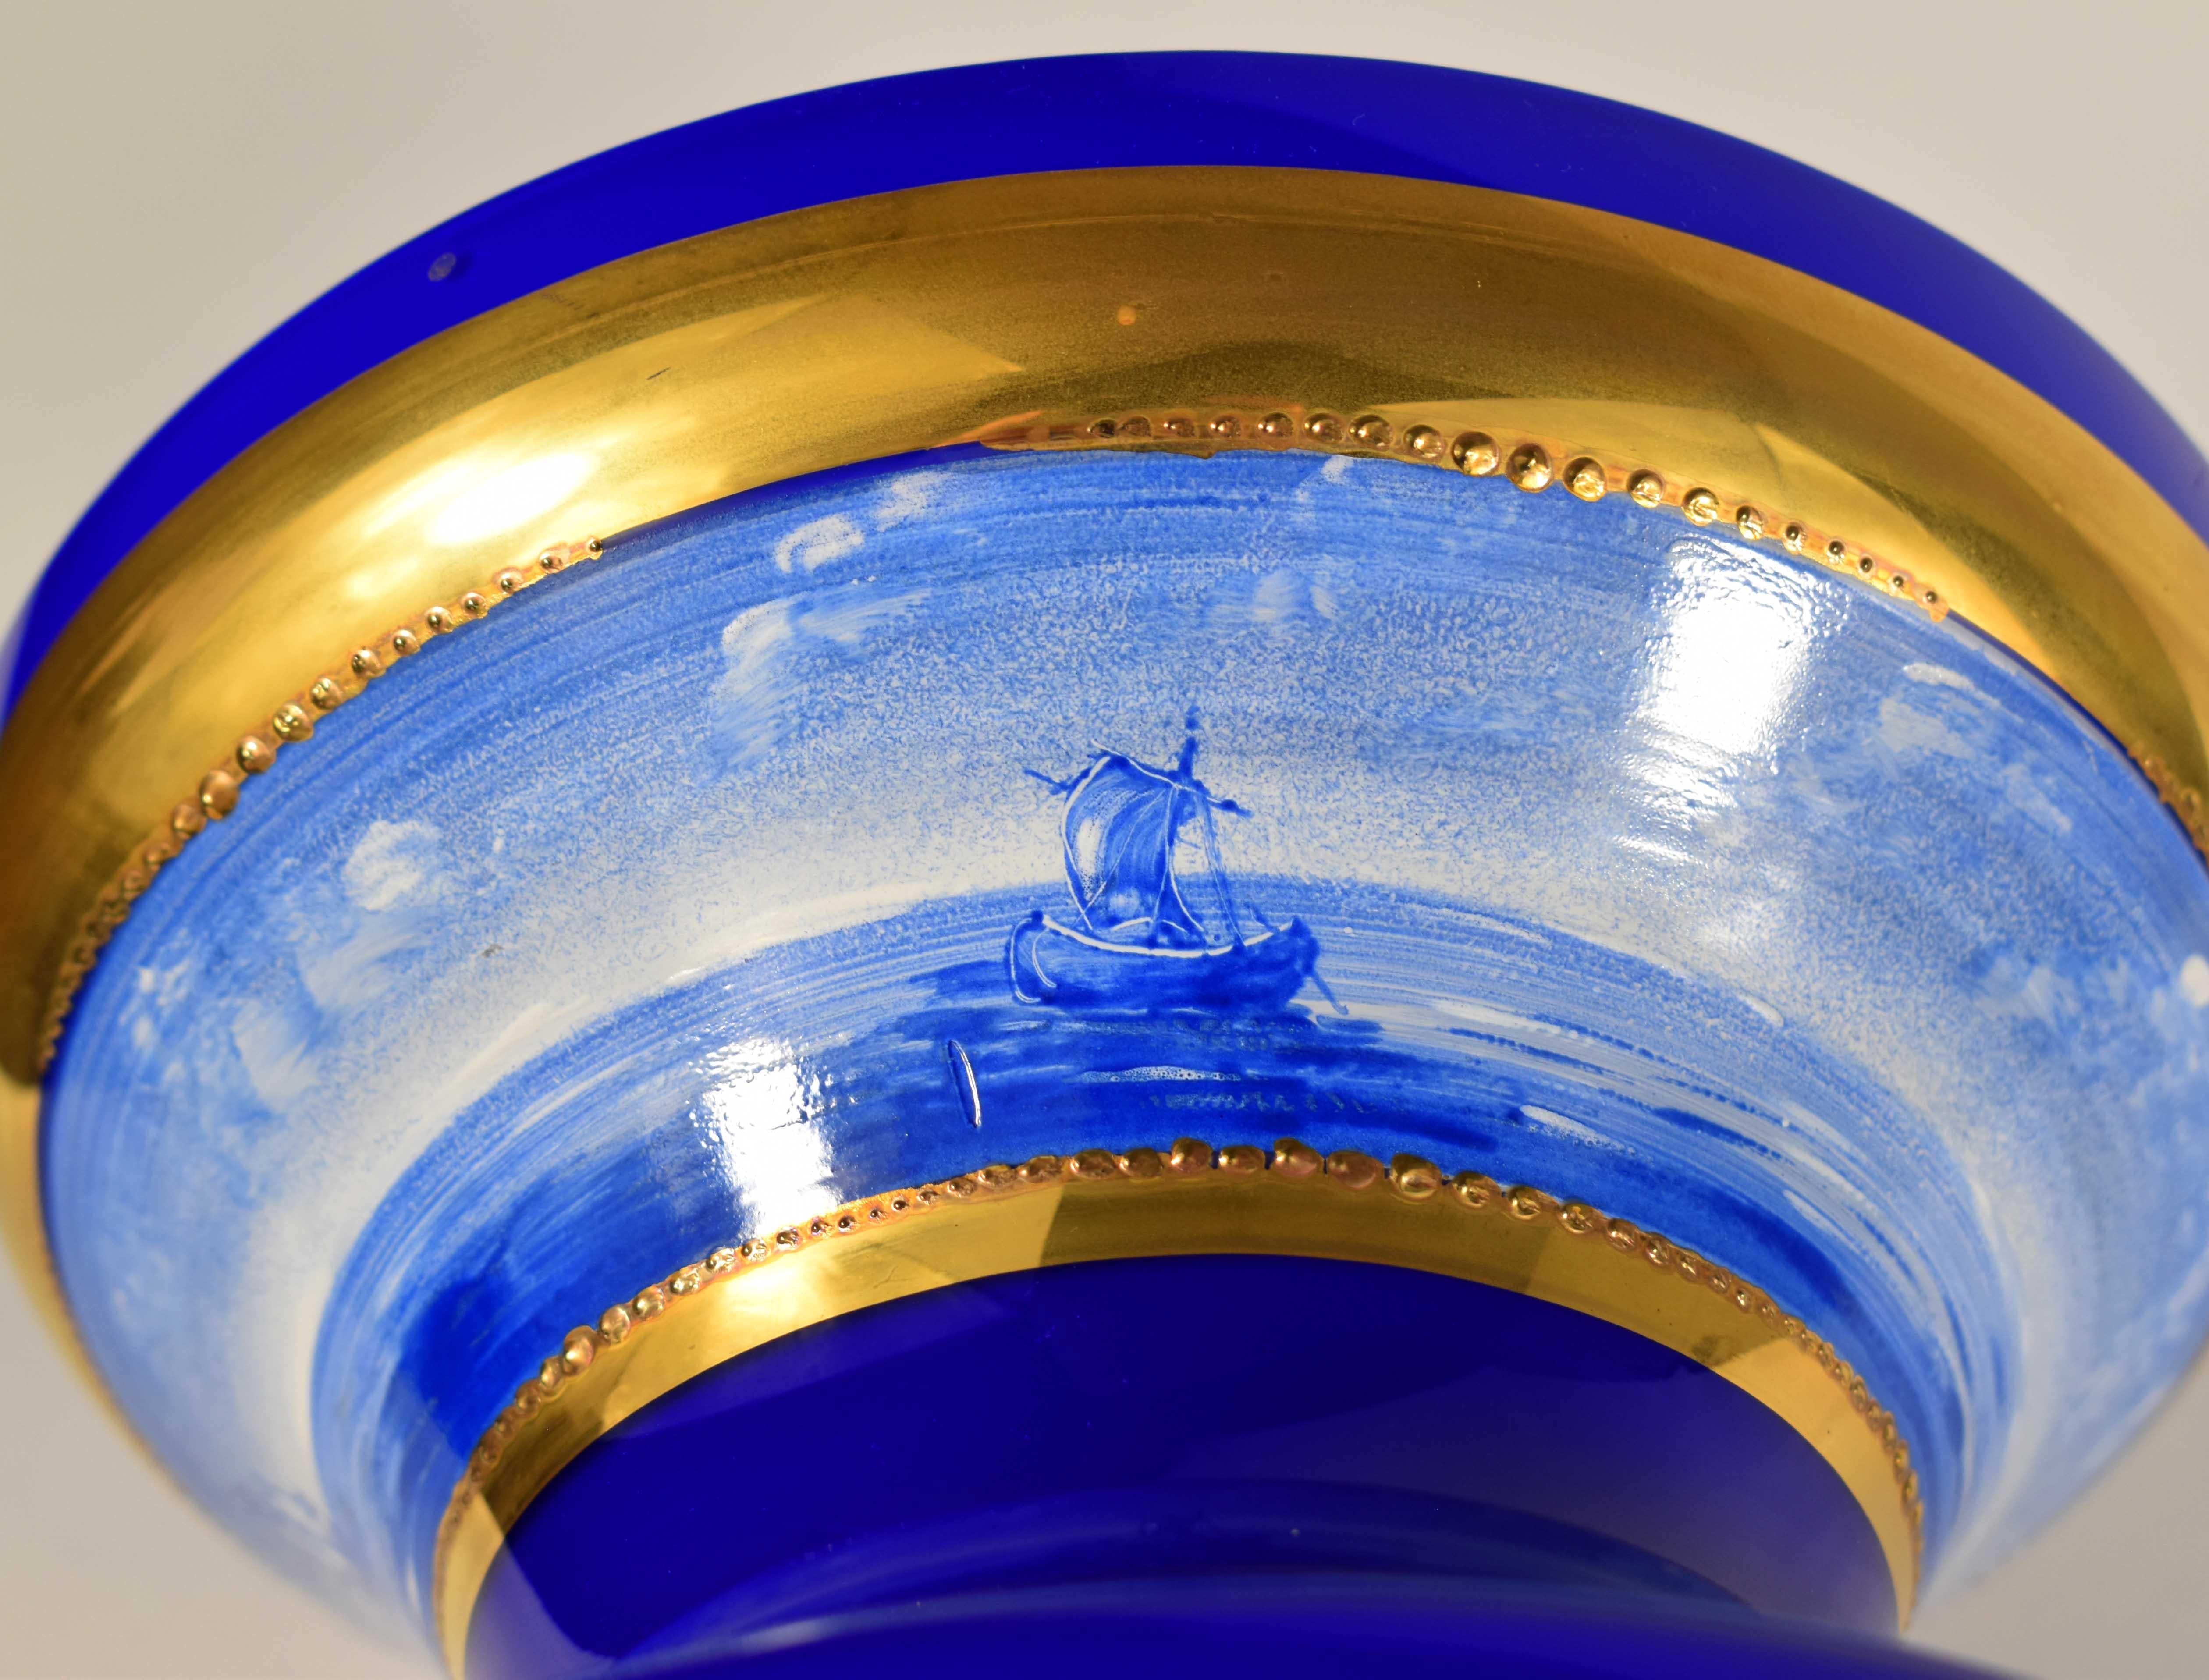 Large Opal Vase Overlay Blue Cobalt Glass, Painted Ships, Gilded, 20th Century For Sale 6